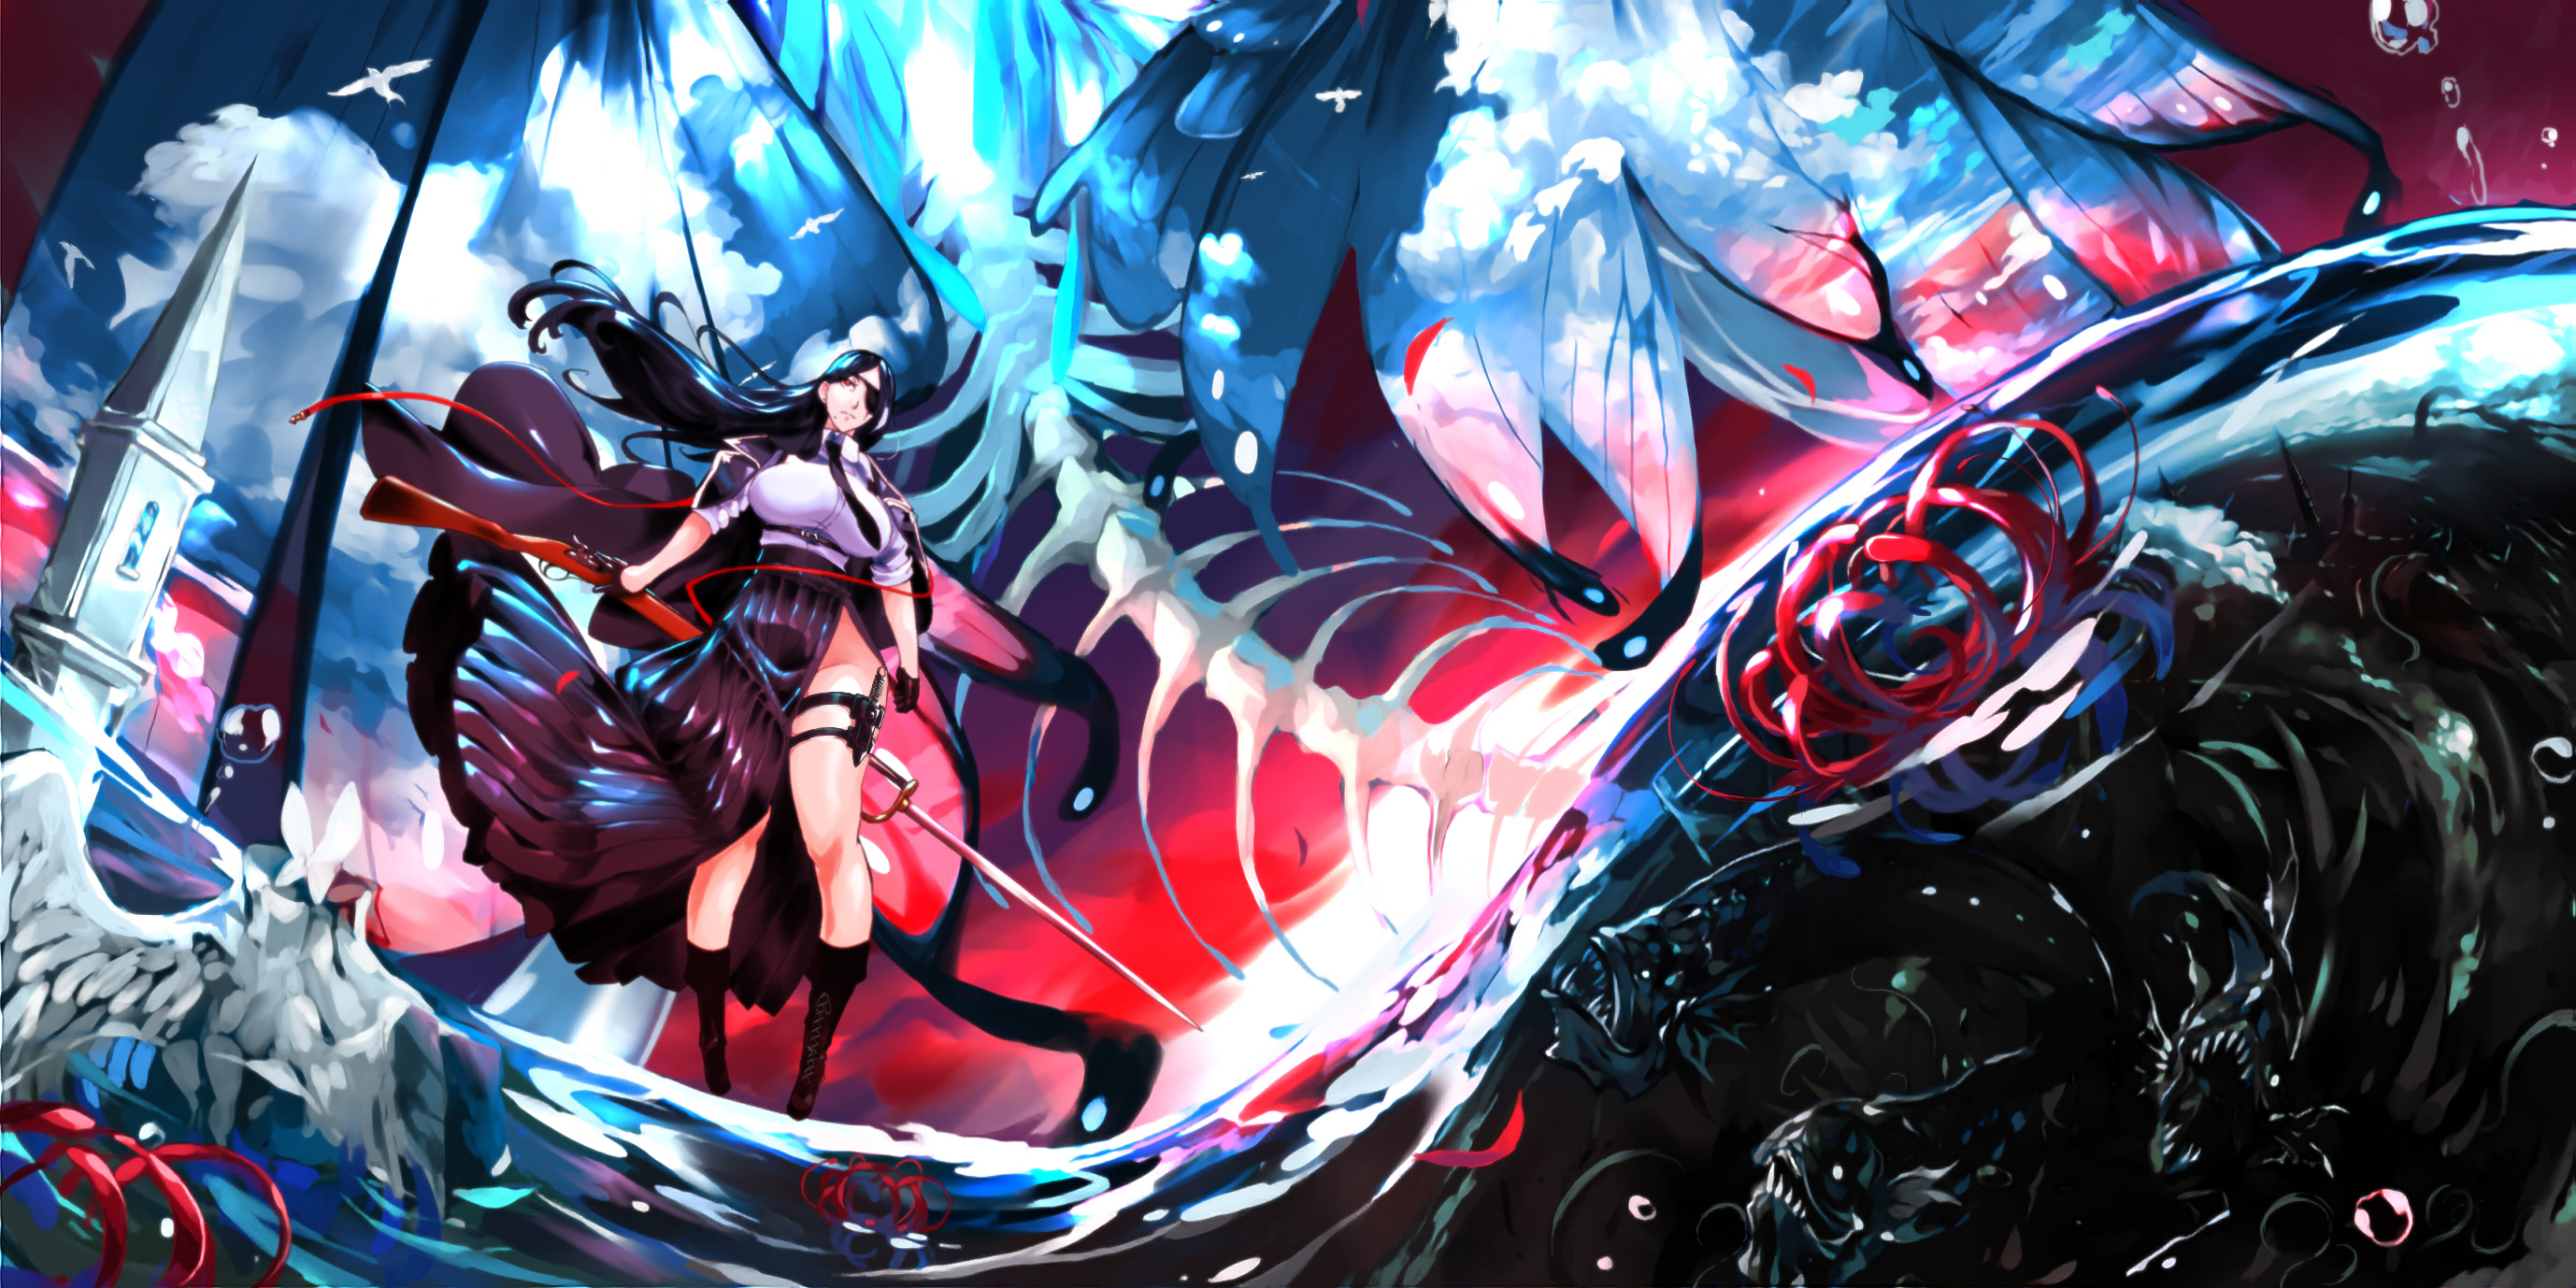 Anime 2756x1378 Kridsanatrs anime girls landscape water fish low-angle bubbles water drops sky clouds thighs skirt big boobs gun sword weapon bug eyepatches long hair black hair red eyes red sky skeleton legs flowers gloves